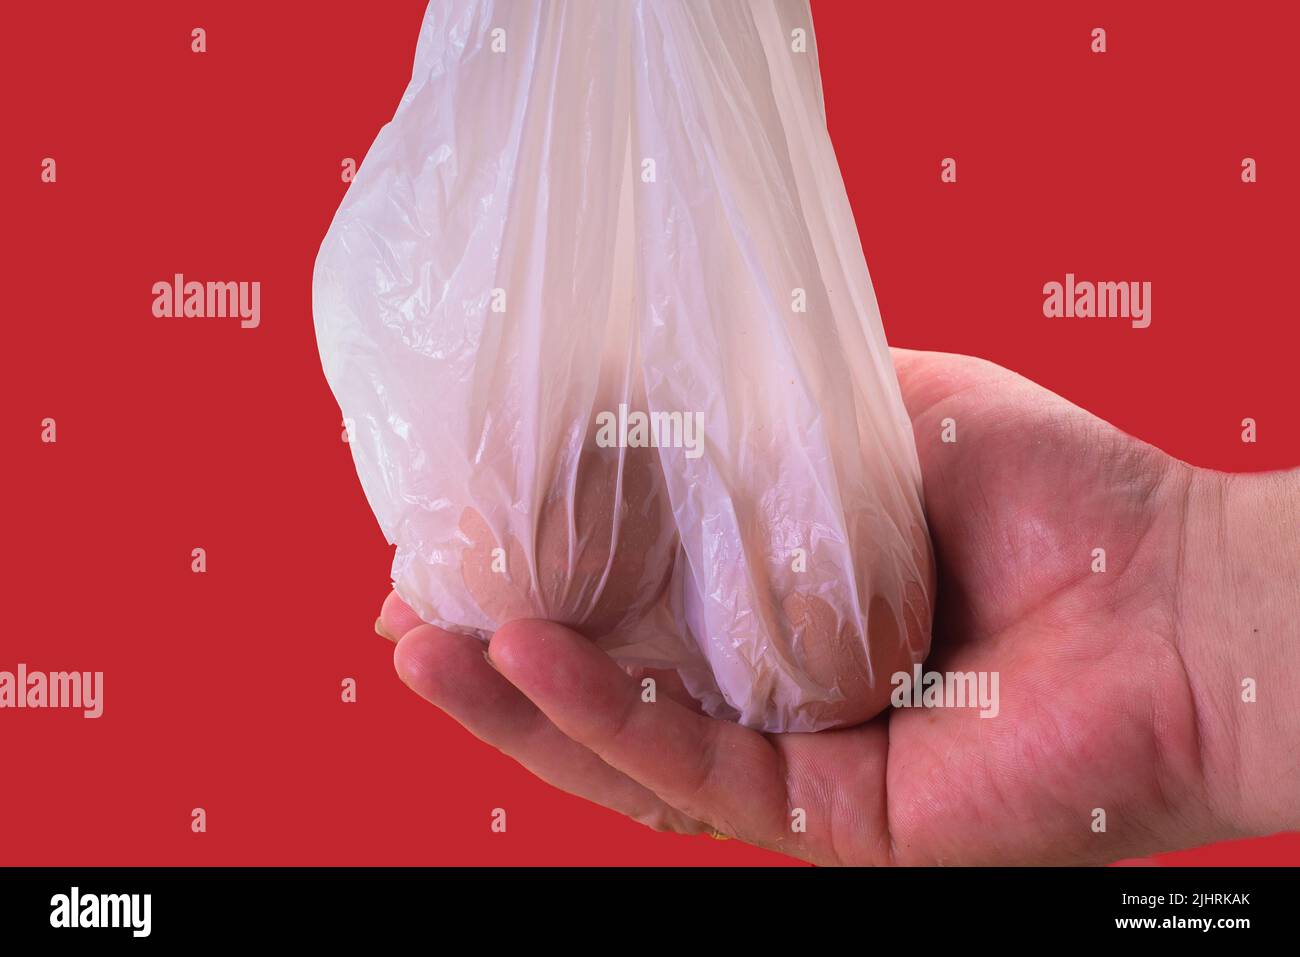 Hand Grasping A Bag With 2 Eggs. Symbol Photo For Examination And Palpation Of The Male Scrotum Stock Photo